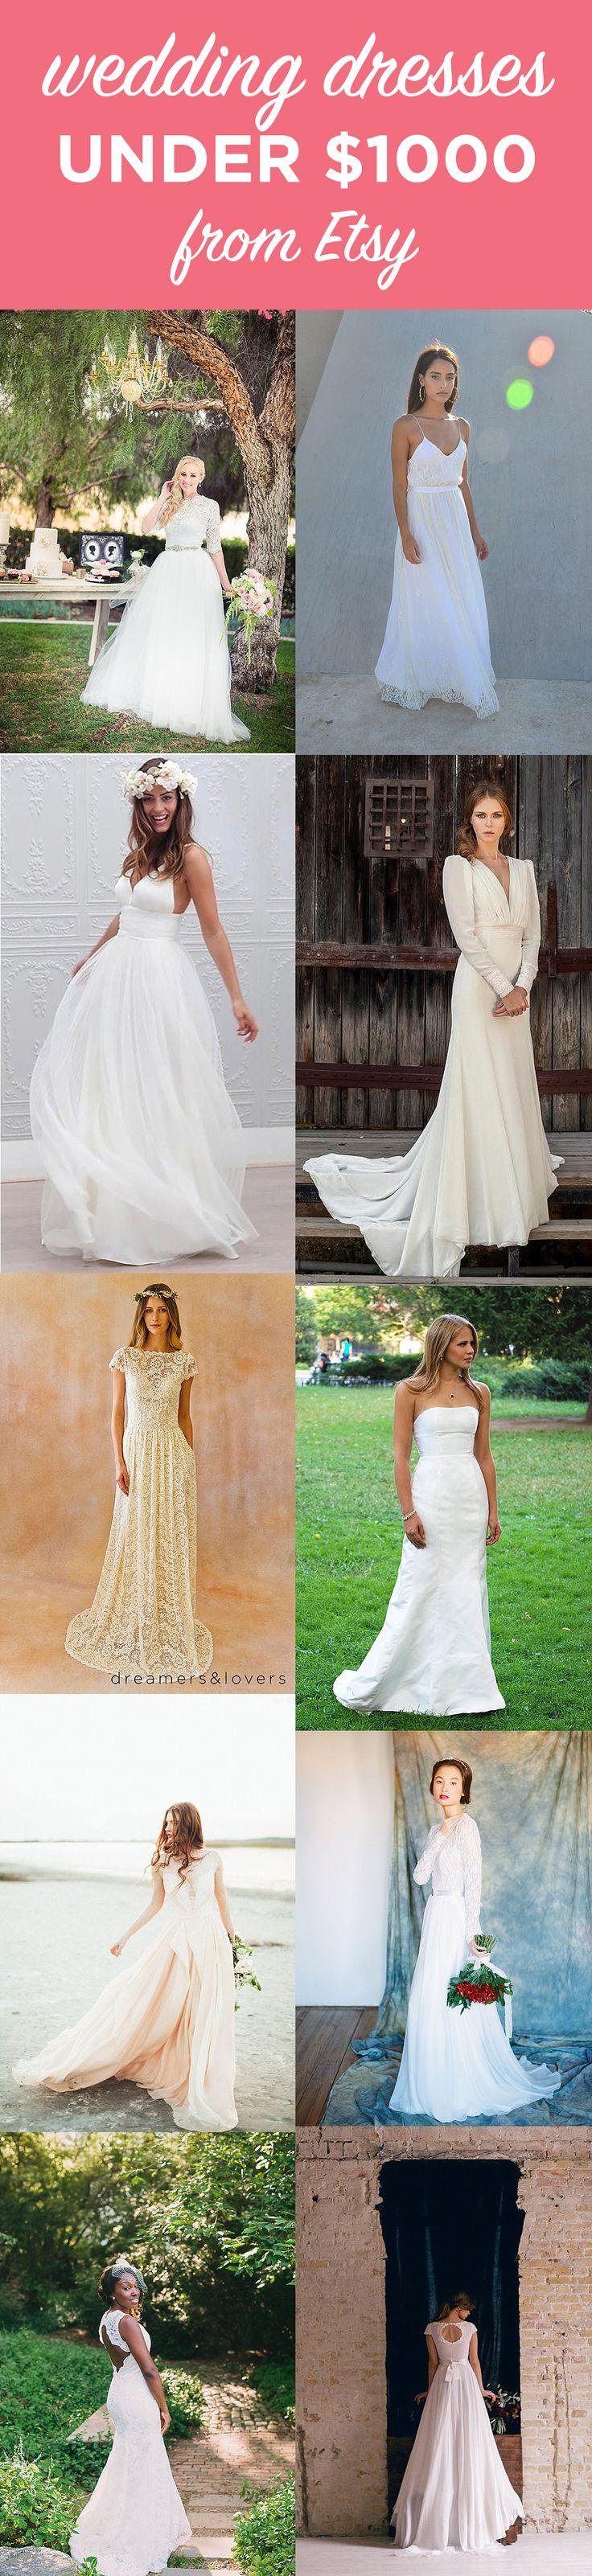 Mariage - 10 Gorgeous Wedding Gowns Under $1000 From Etsy